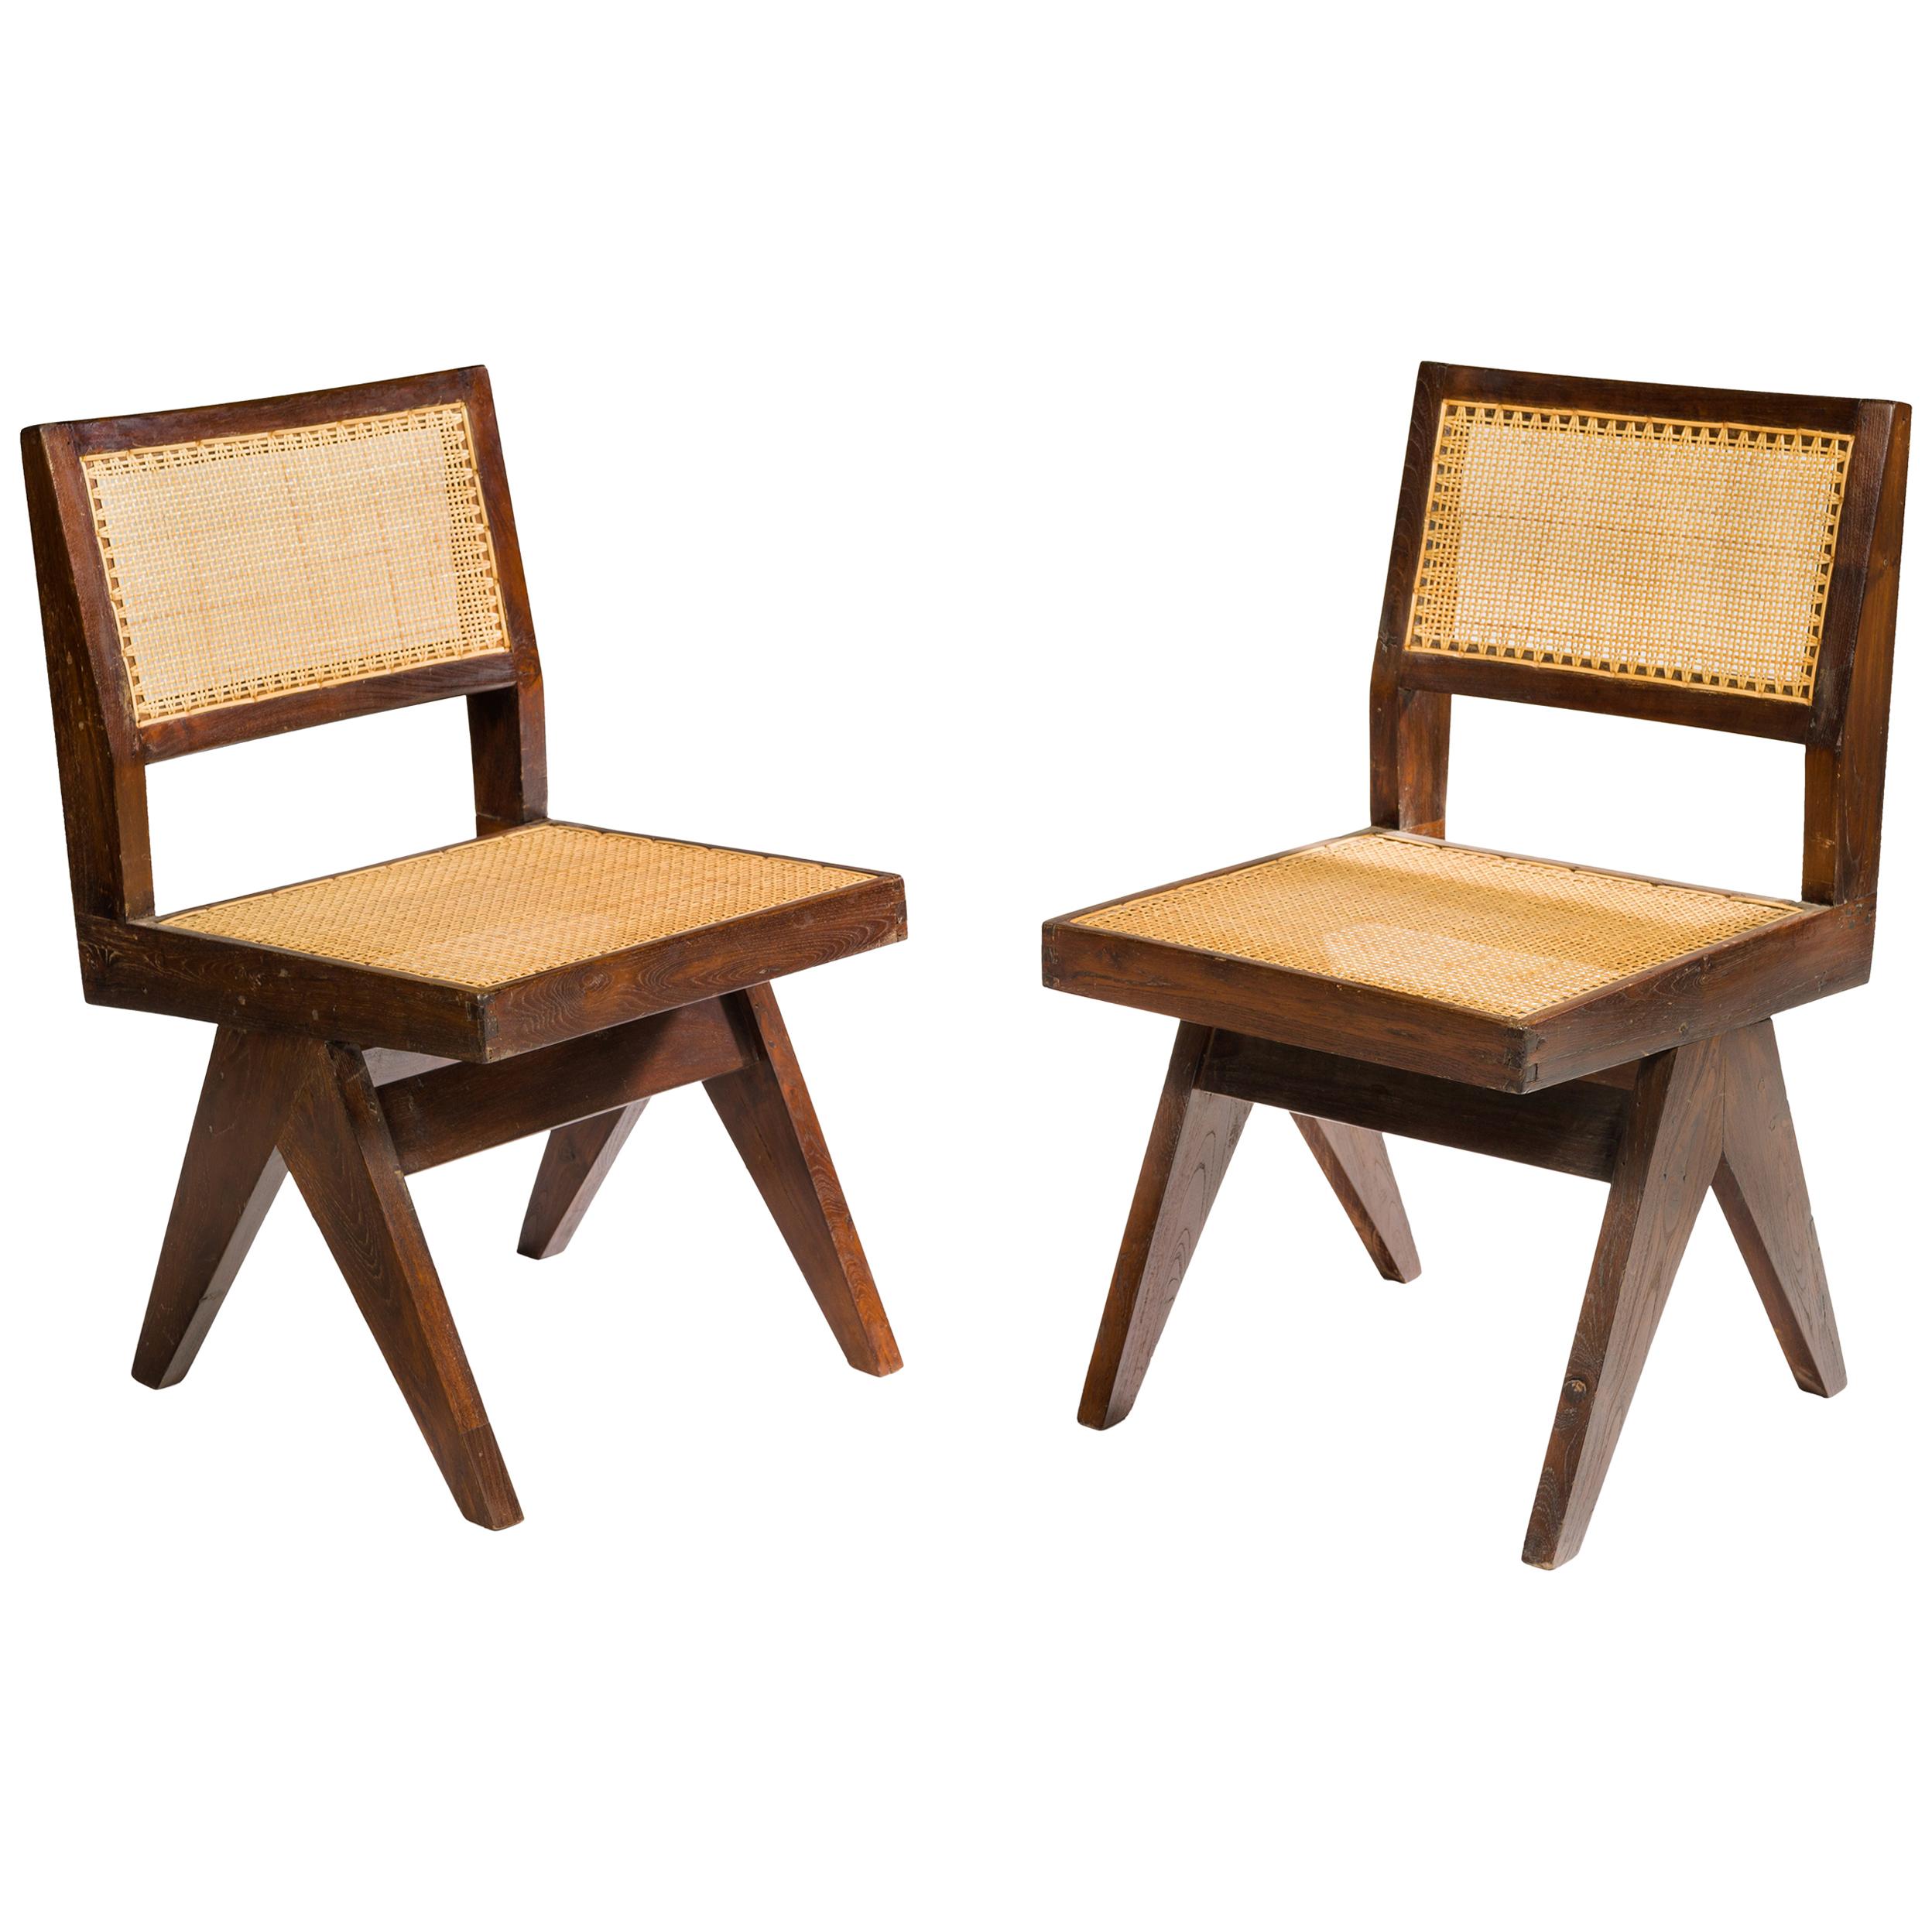 Pierre Jeanneret, V Type Chairs, a Pair, 1958